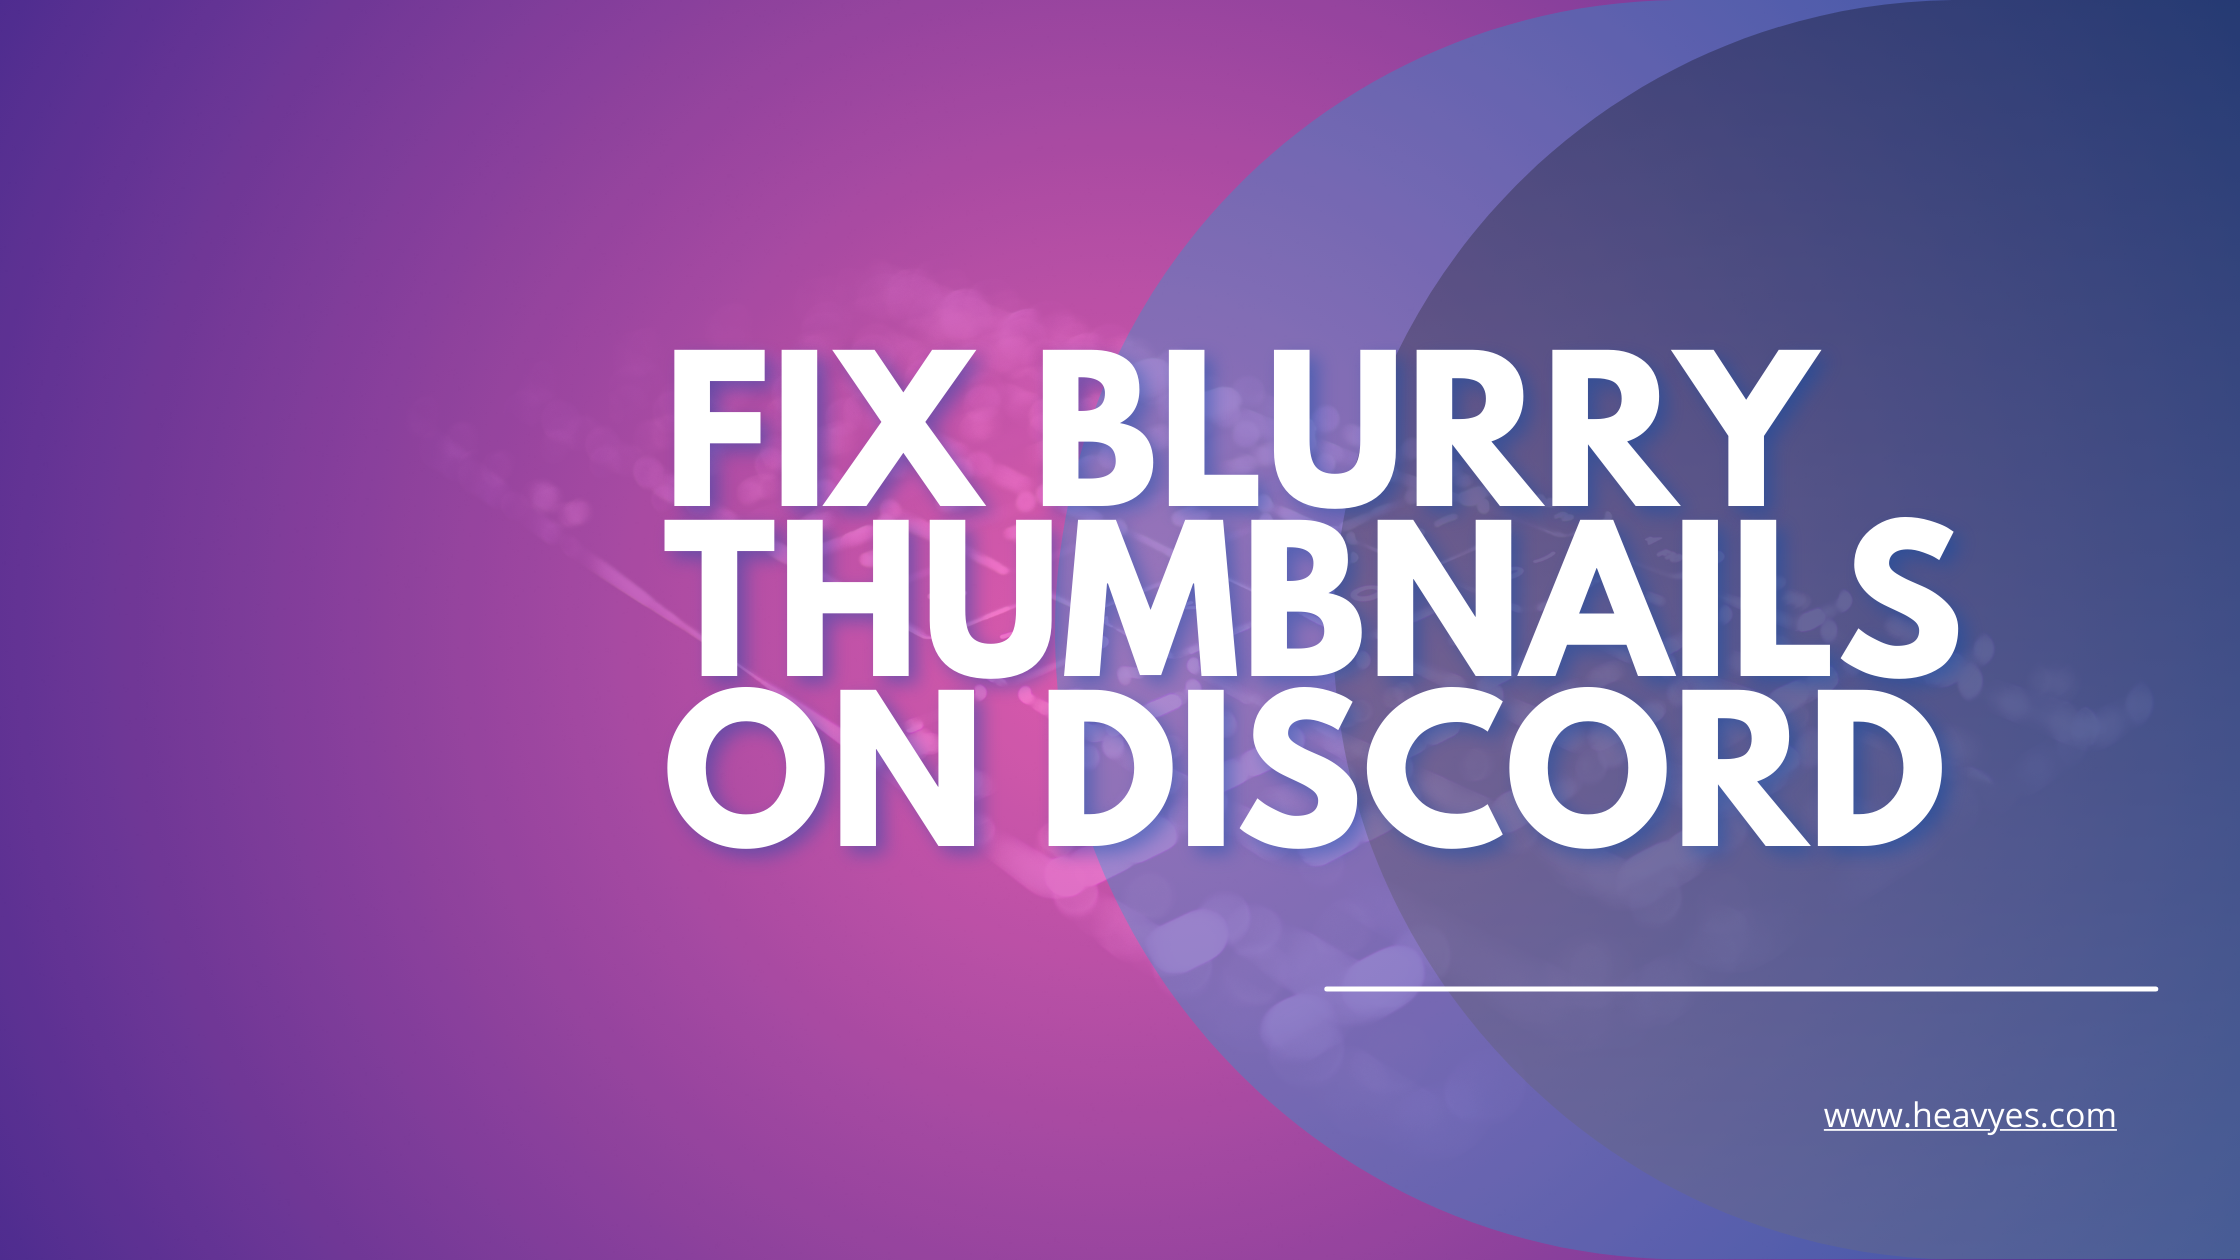 How To Fix Low-Quality Thumbnails On Discord